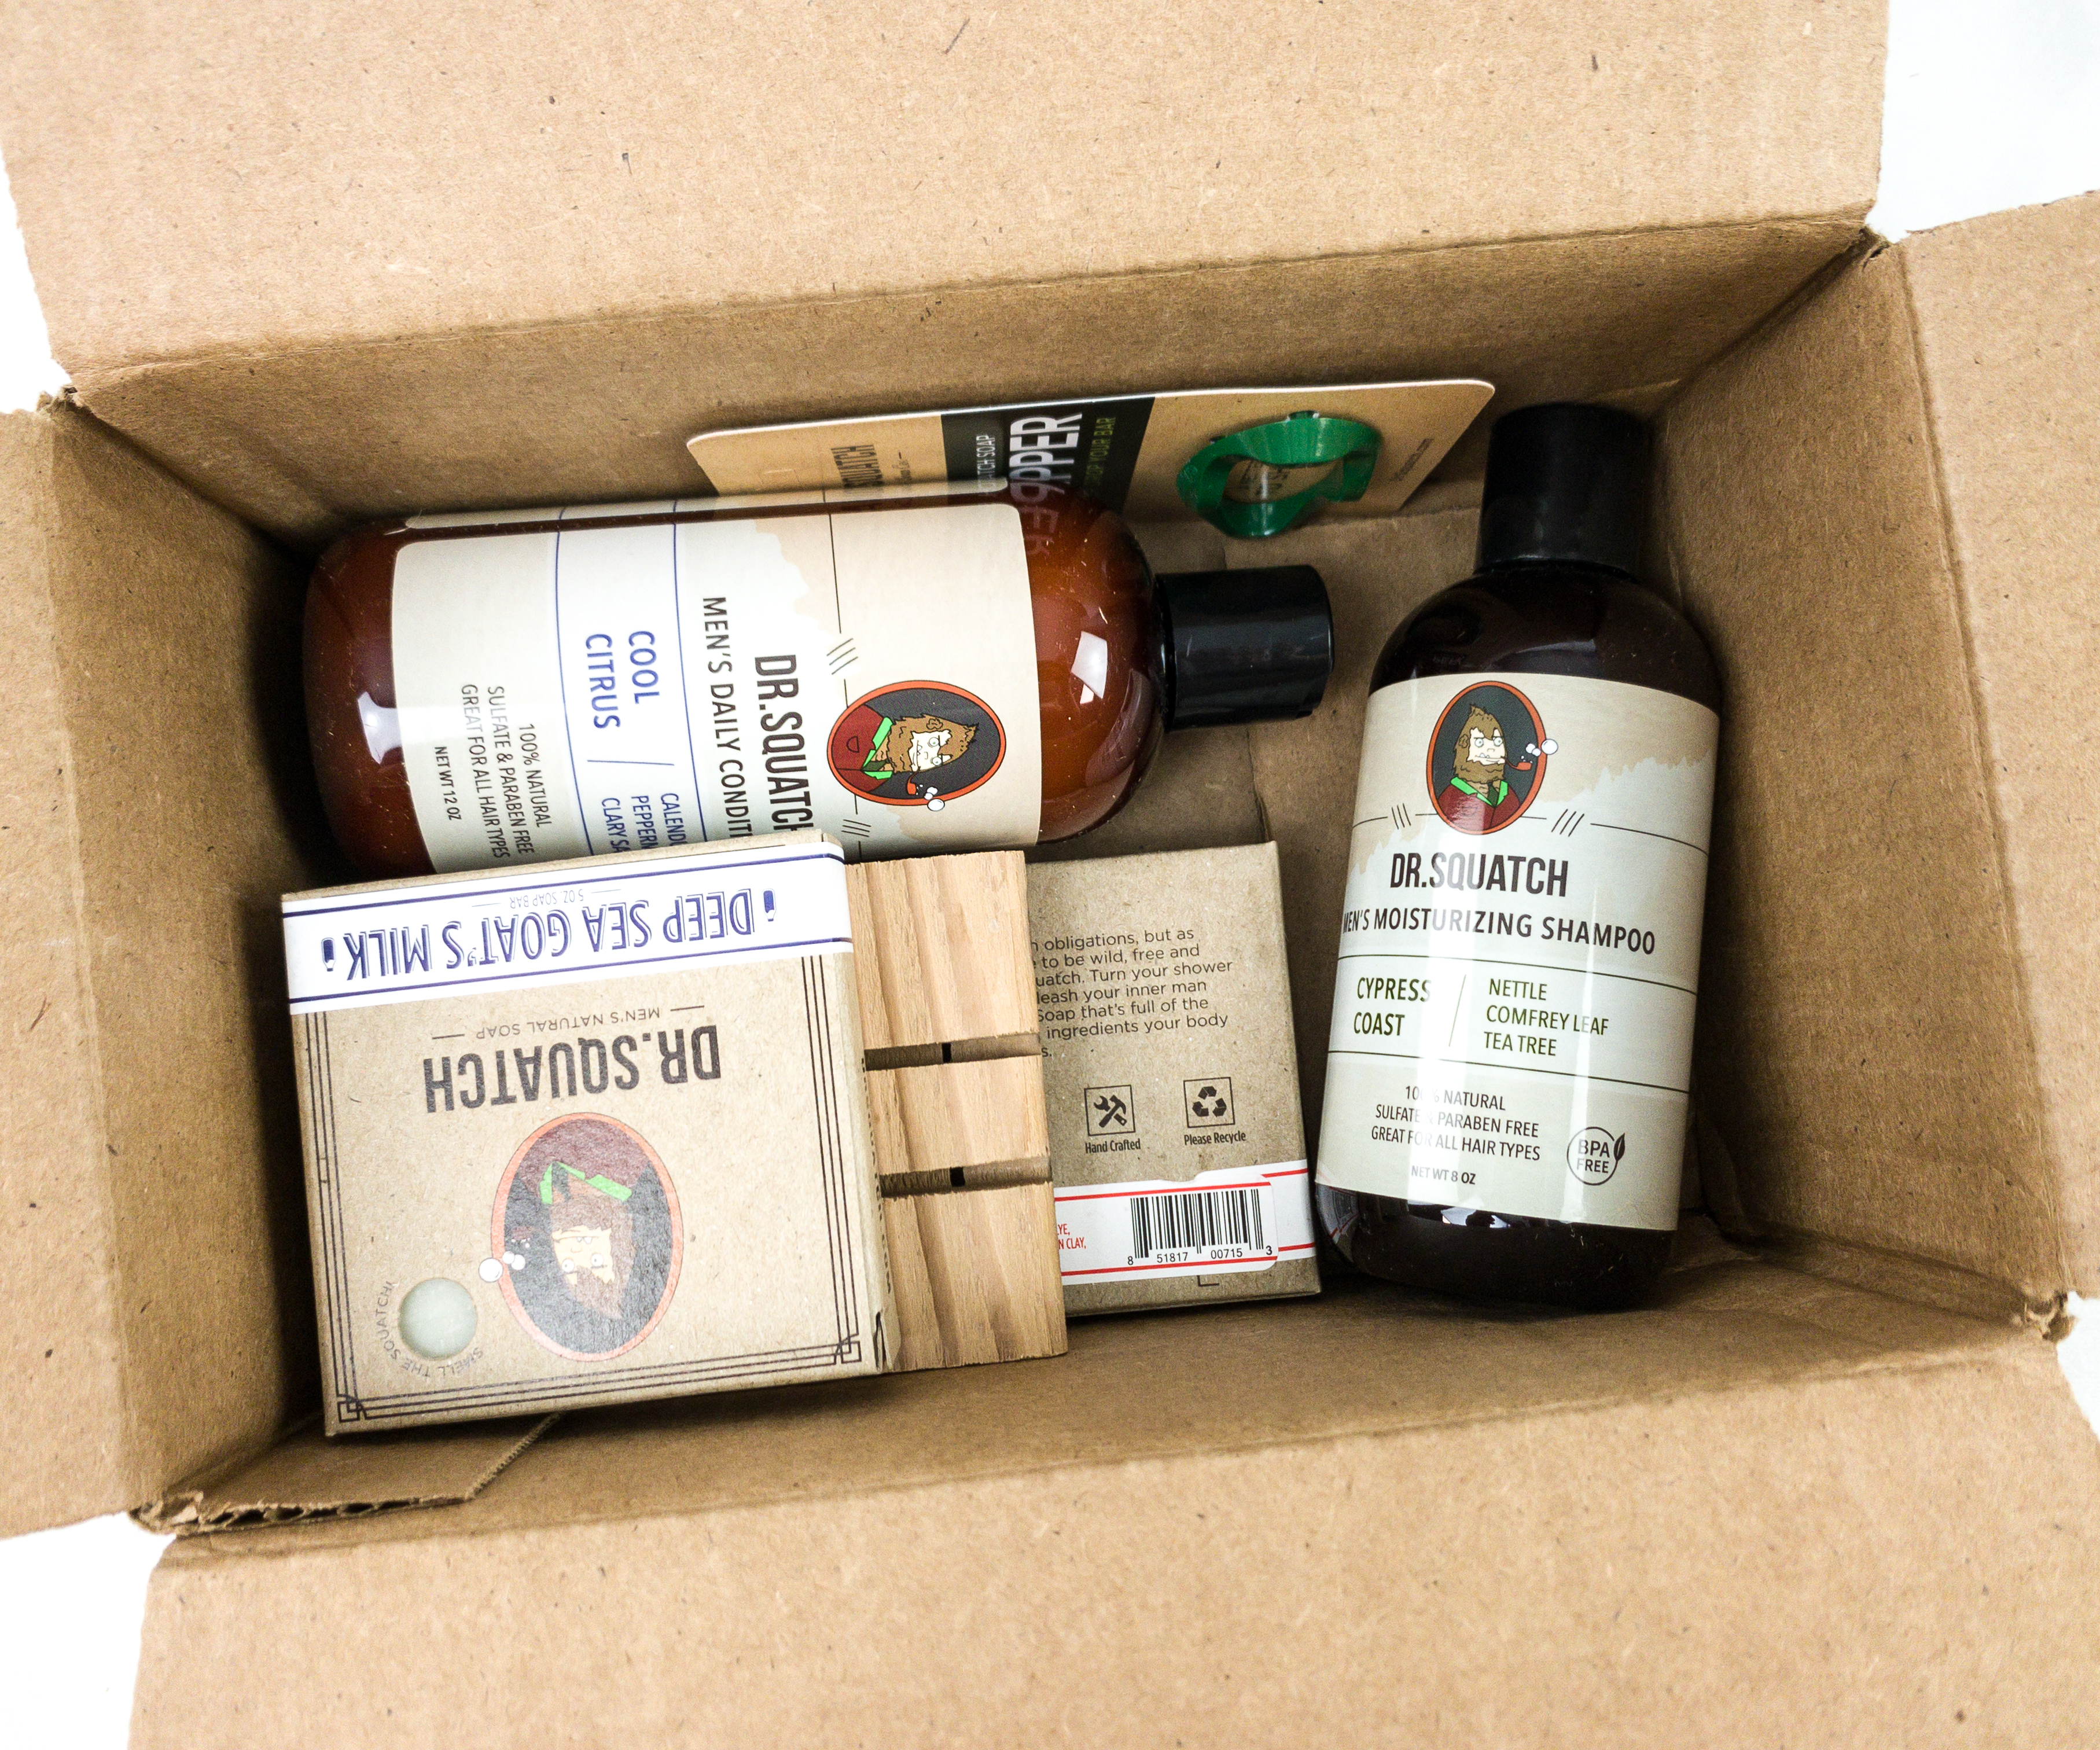 Dr. Squatch Subscriptions Review + Coupons - Squatch Groomed